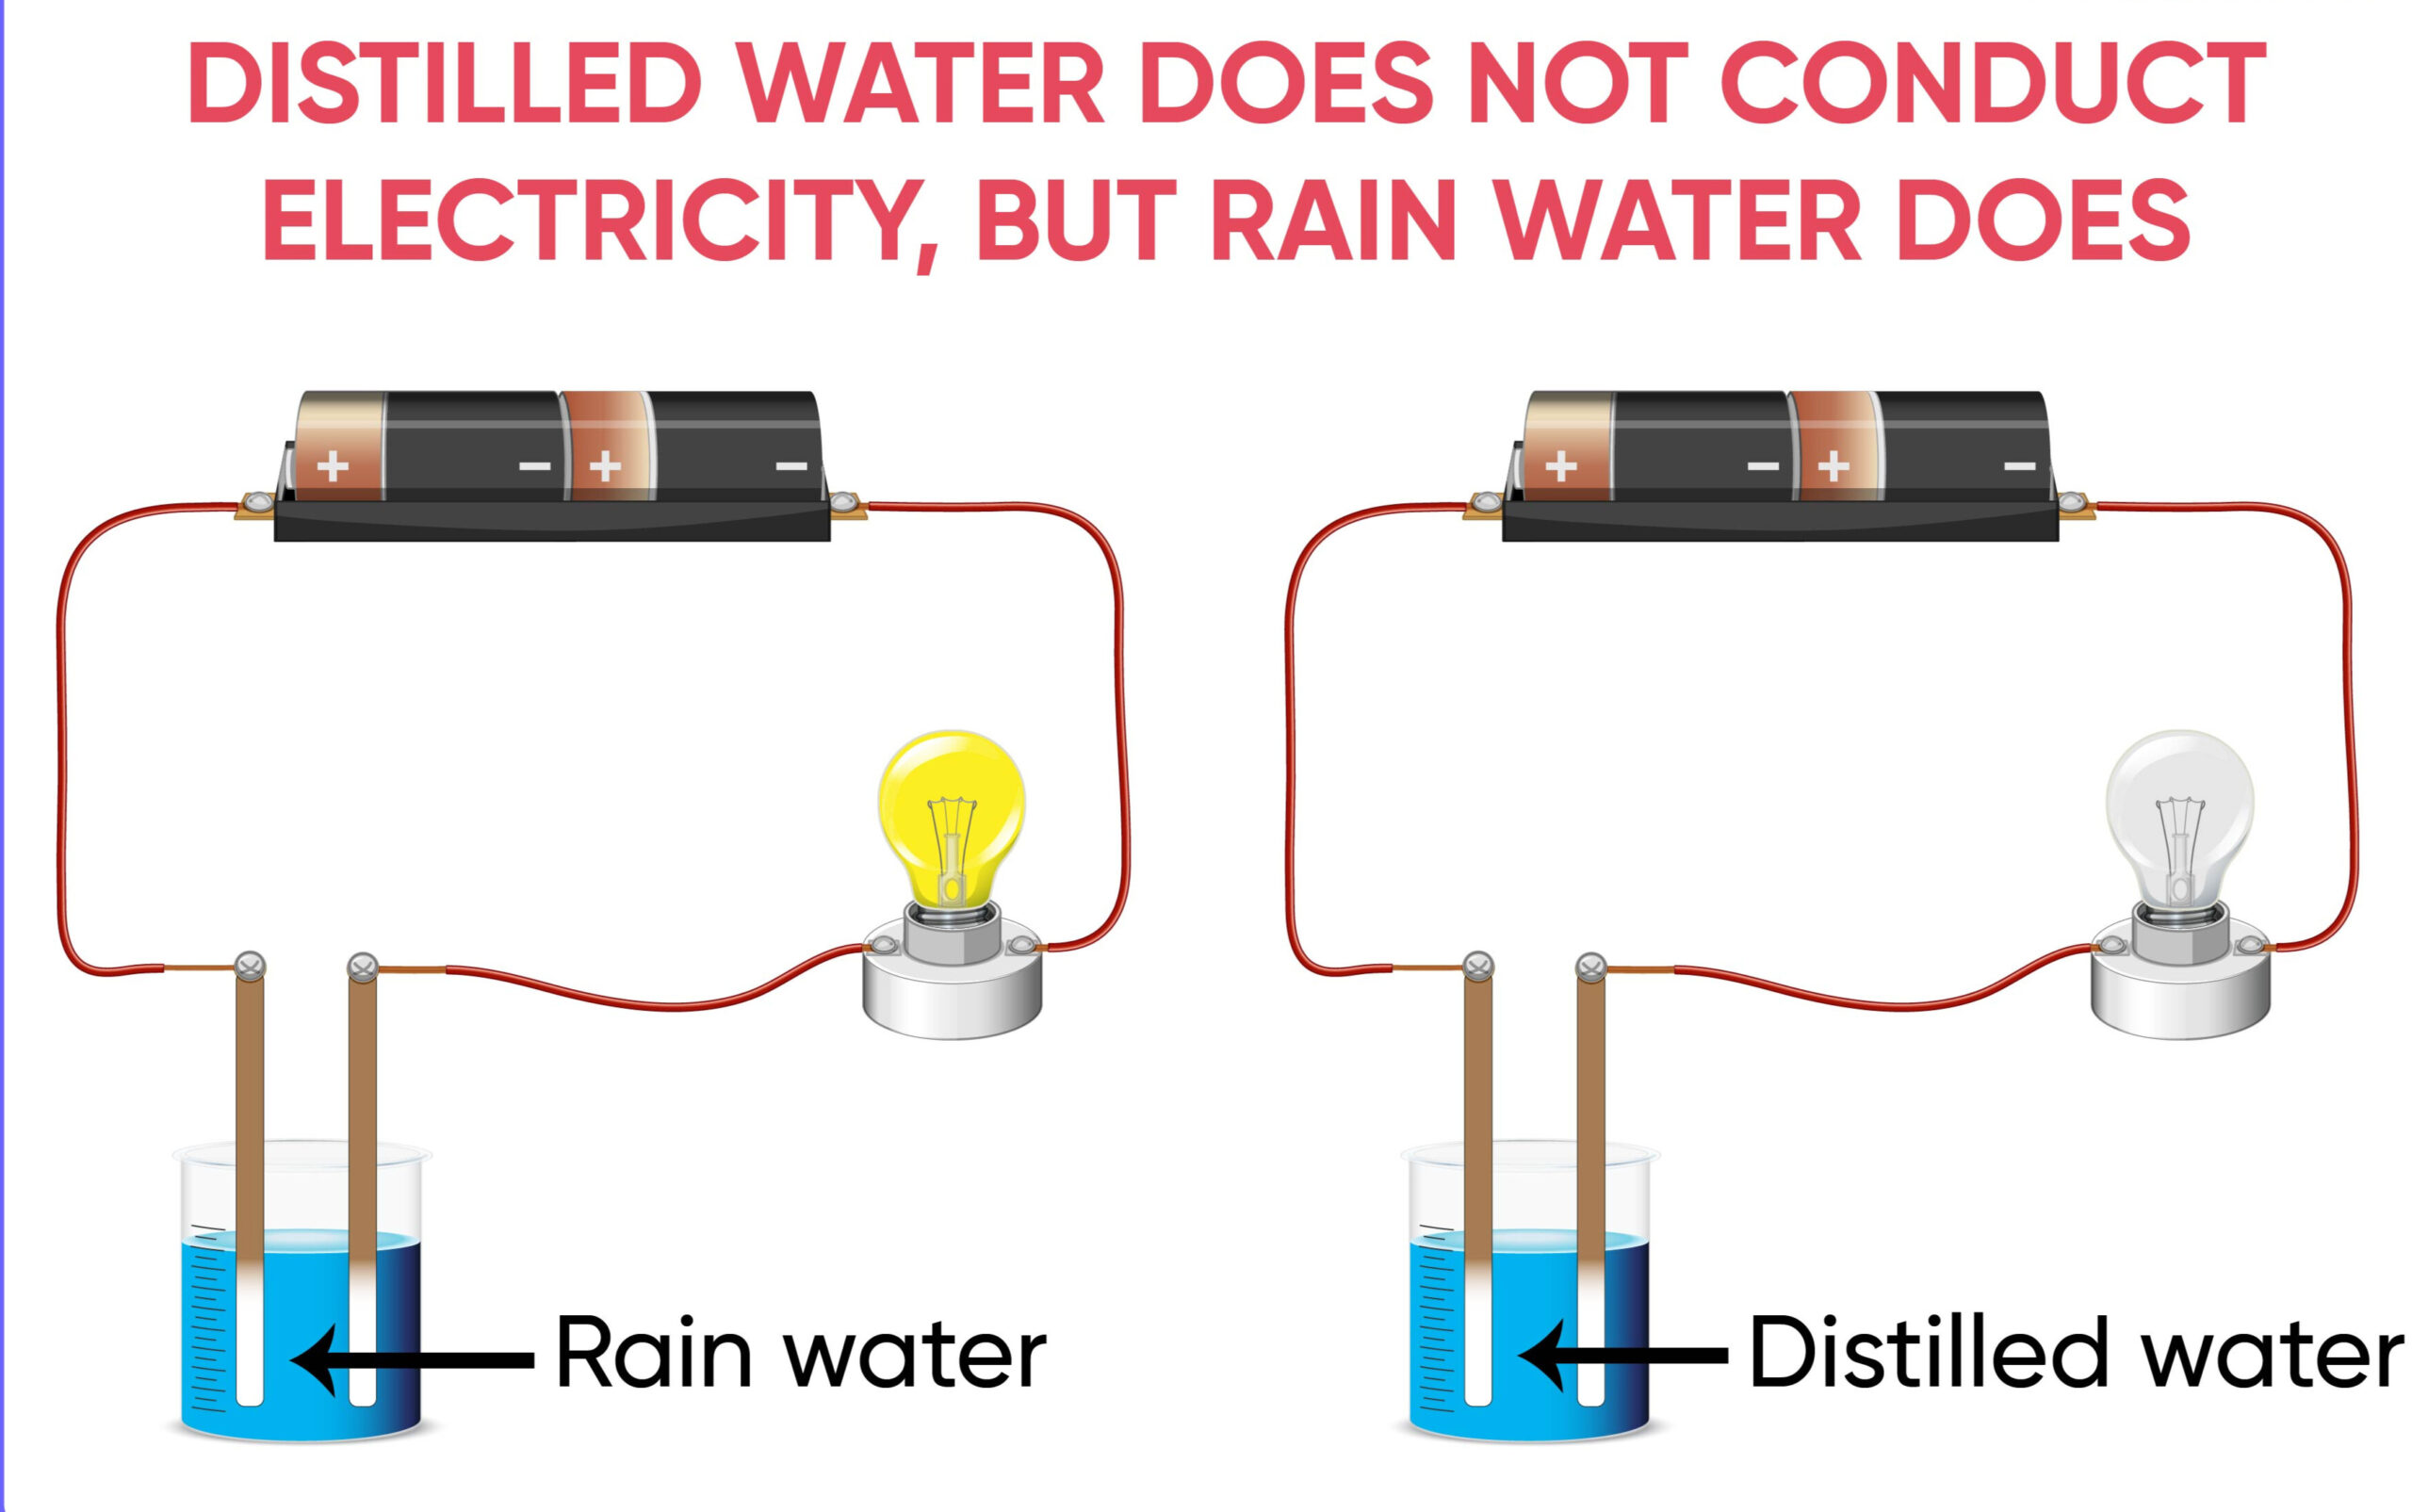 Why Does Distilled Water Not Conduct Electricity Whereas Rainwater Does